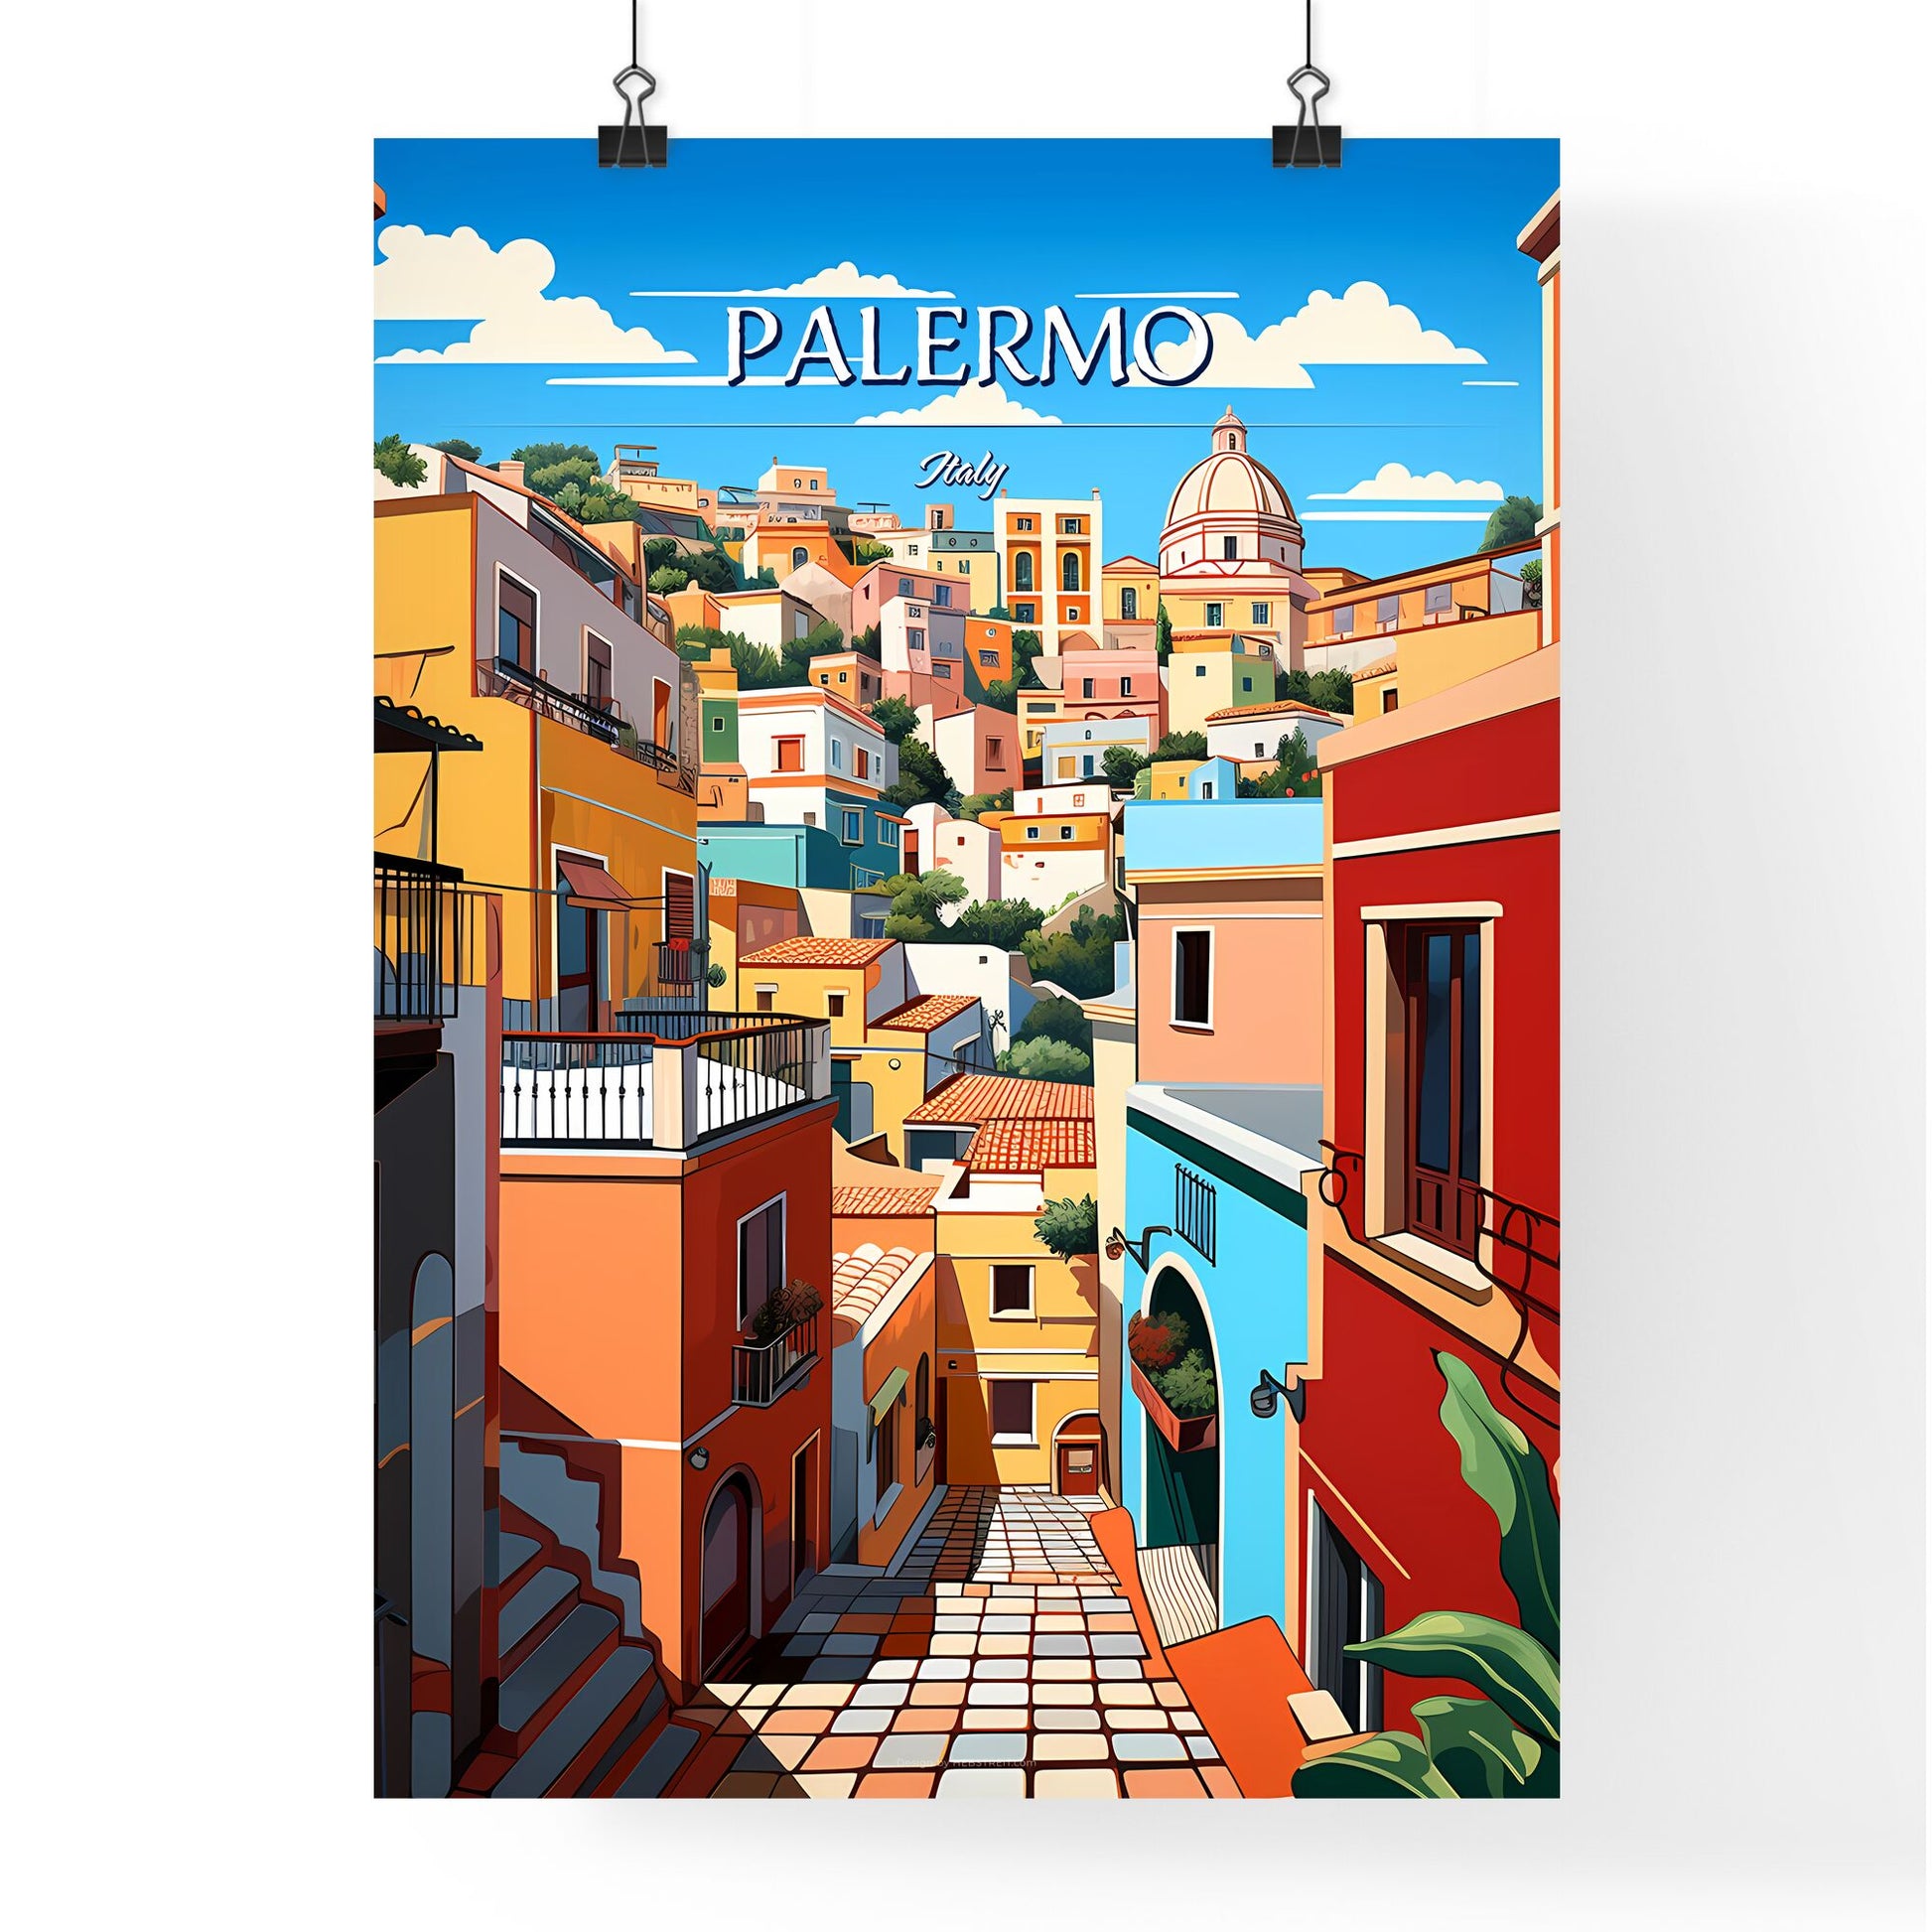 Palermo, Italy - Art print of a colorful buildings on a hill Default Title